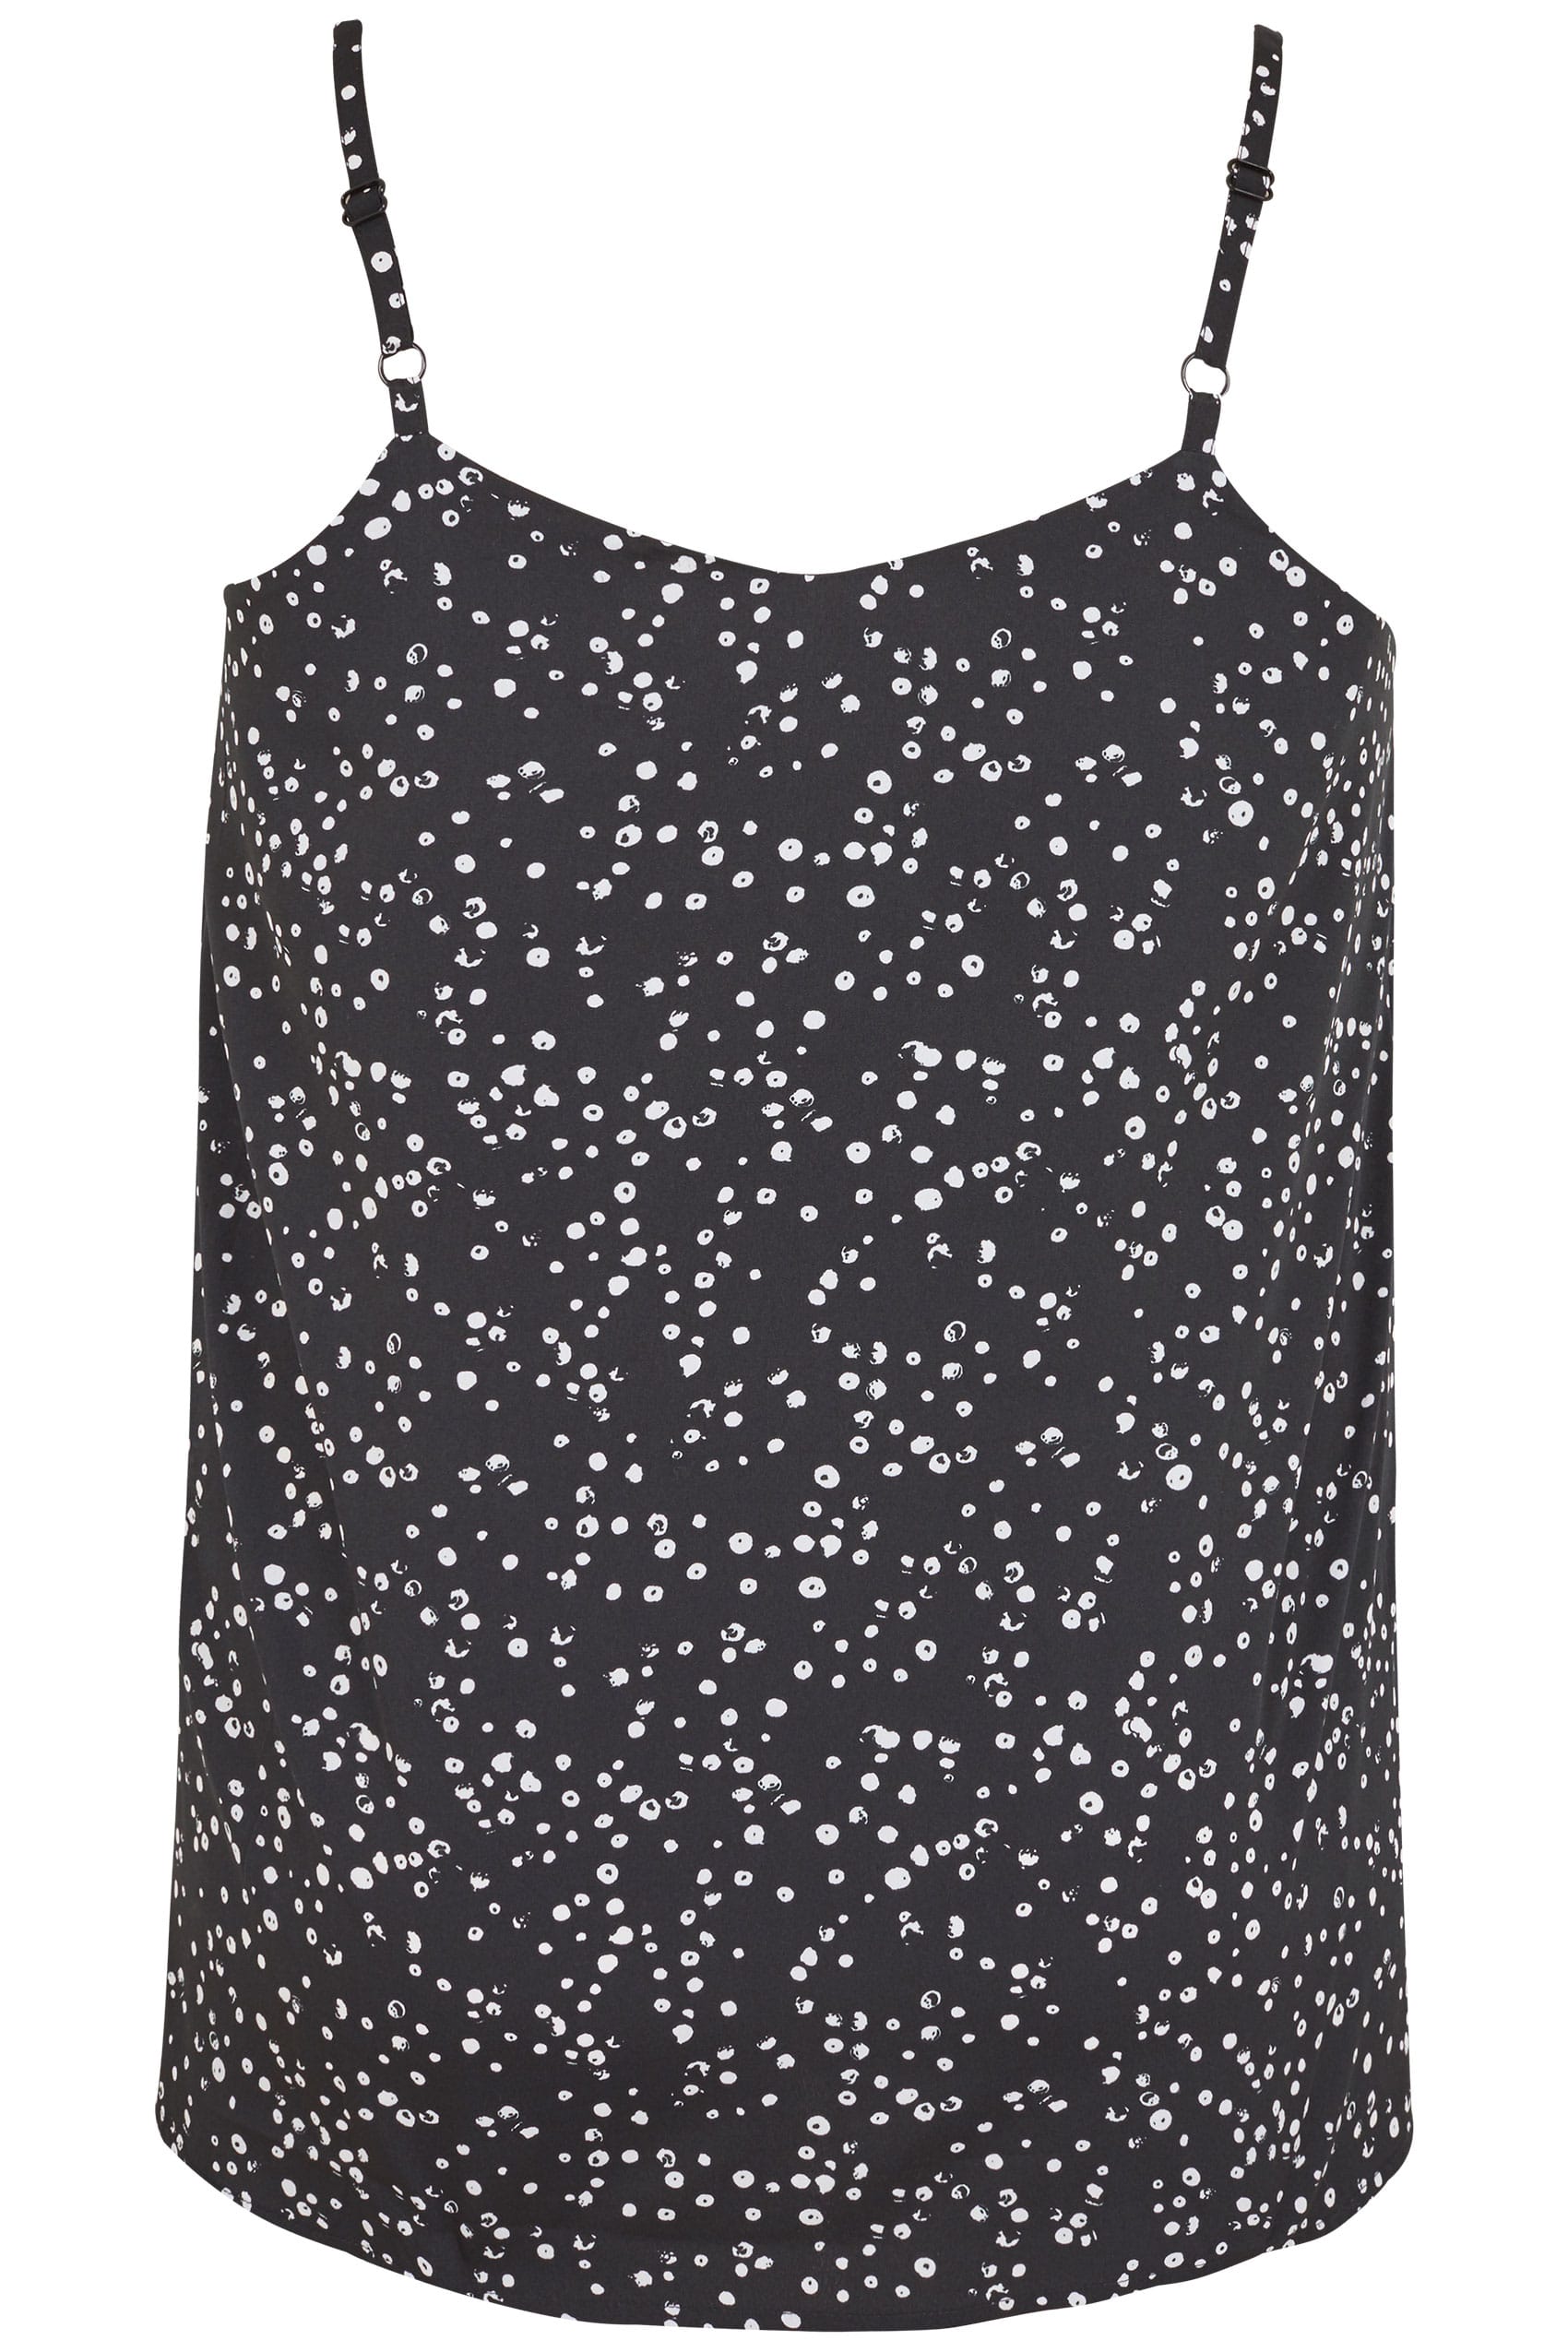 Black & White Dotty Woven Cami Top With Side Splits, Plus size 16 to 36 ...